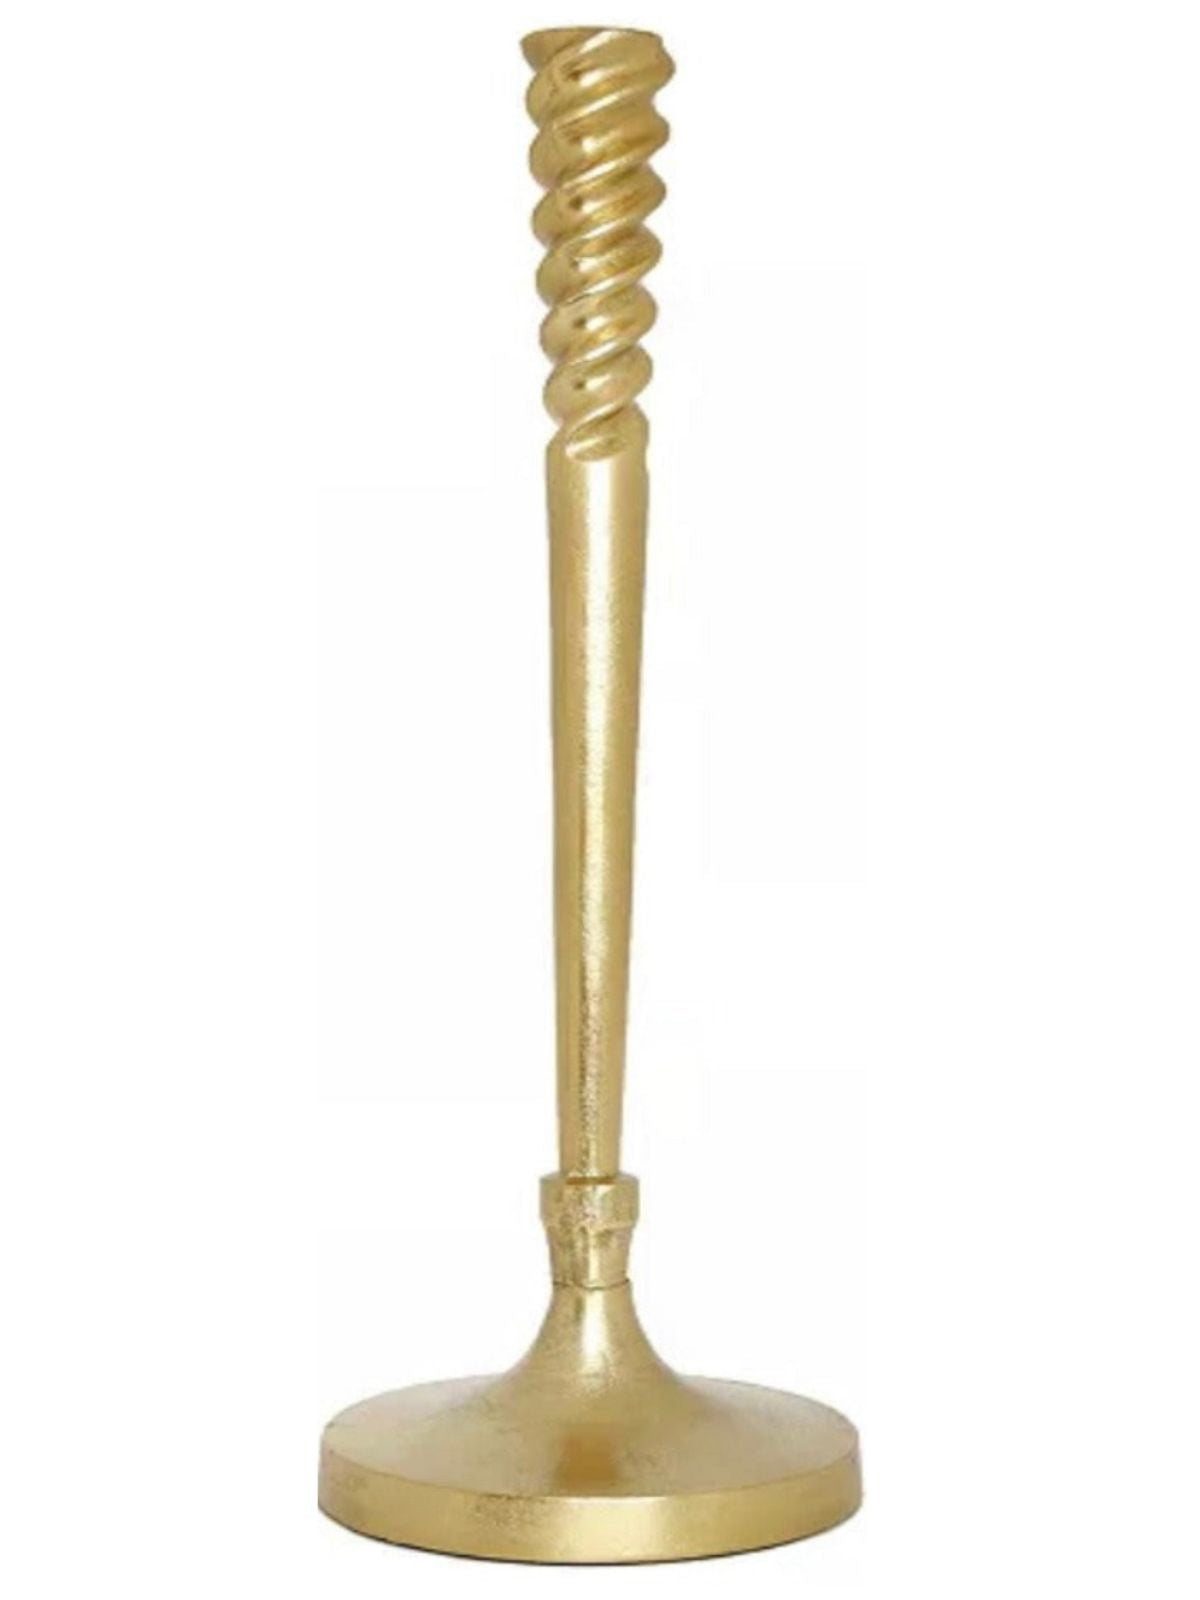 This 27H Gold Stainless Steel Candlestick Holder Has A Spiral Design On Top. Sold by KYA Home Decor.